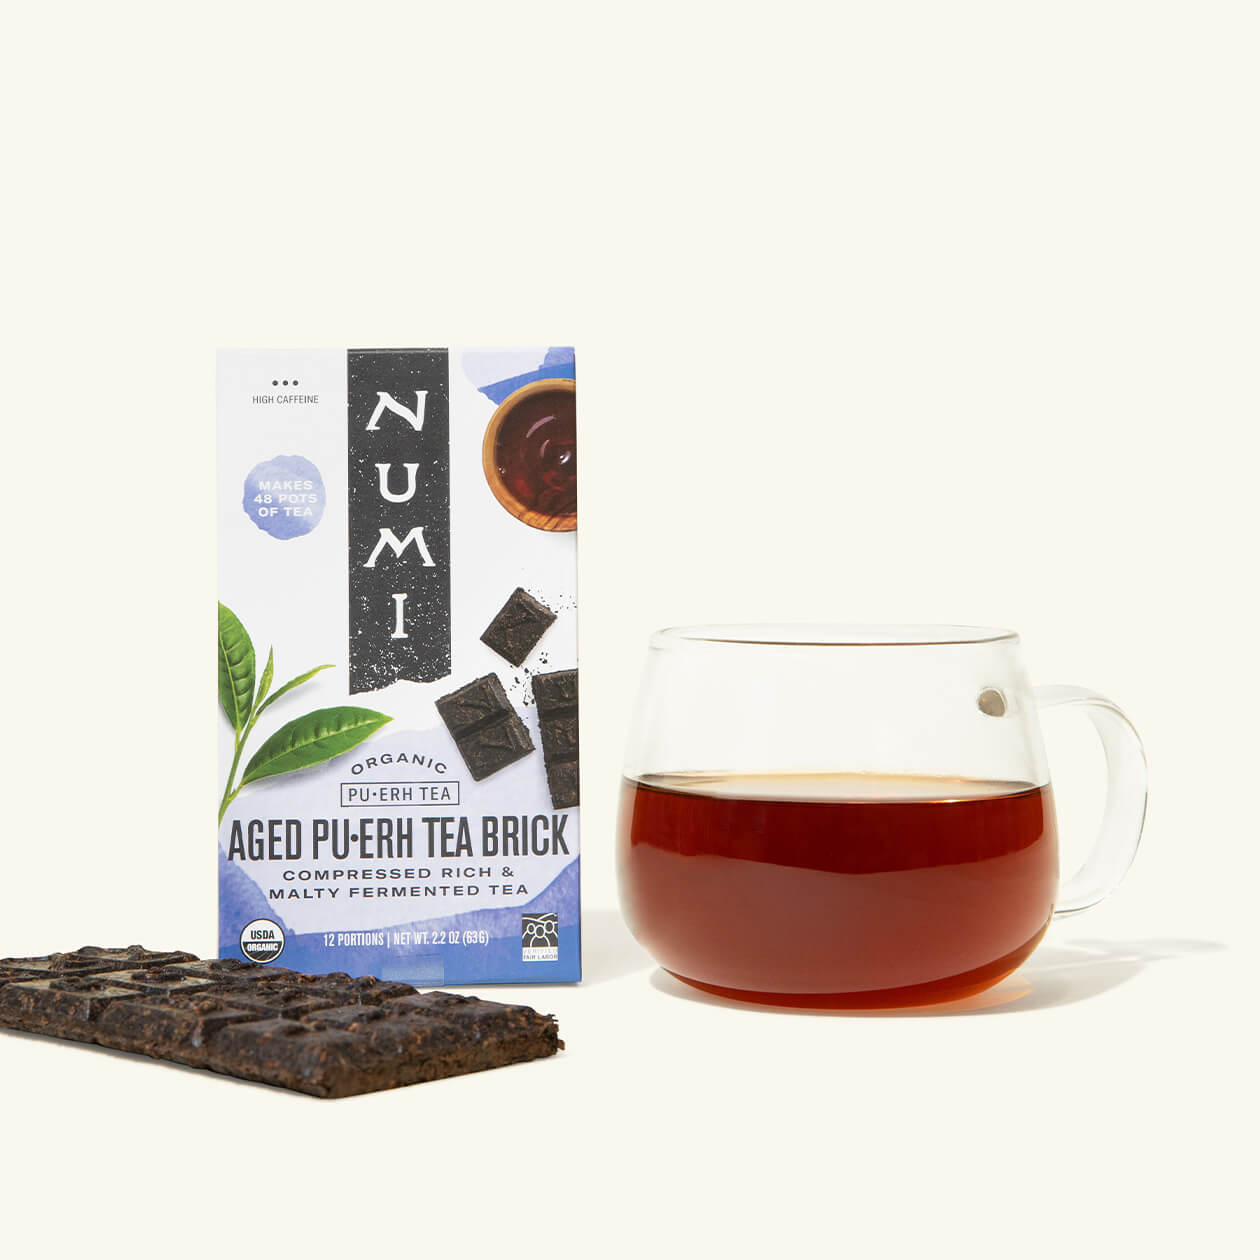 A box of Numi Aged Puerh Tea Brick with a brewed cup of tea